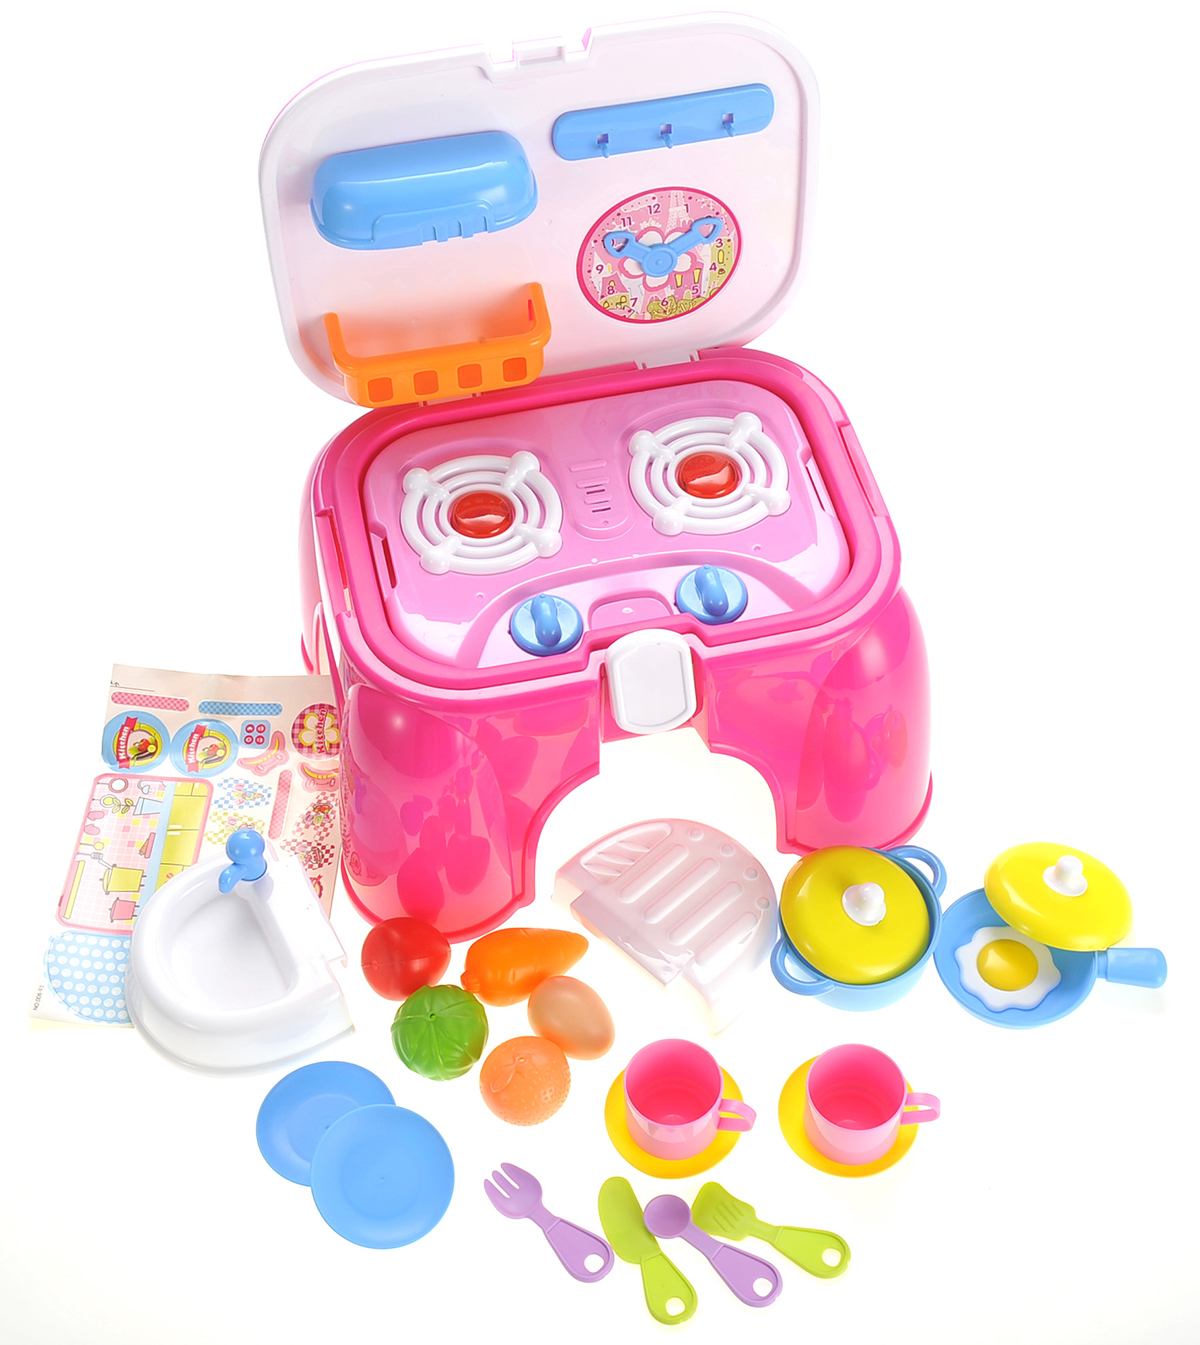 Kitchen Connection Portable Kids Kitchen Cooking Set Toy With Lights And Sounds, Folds Into Stepstool - image 4 of 8